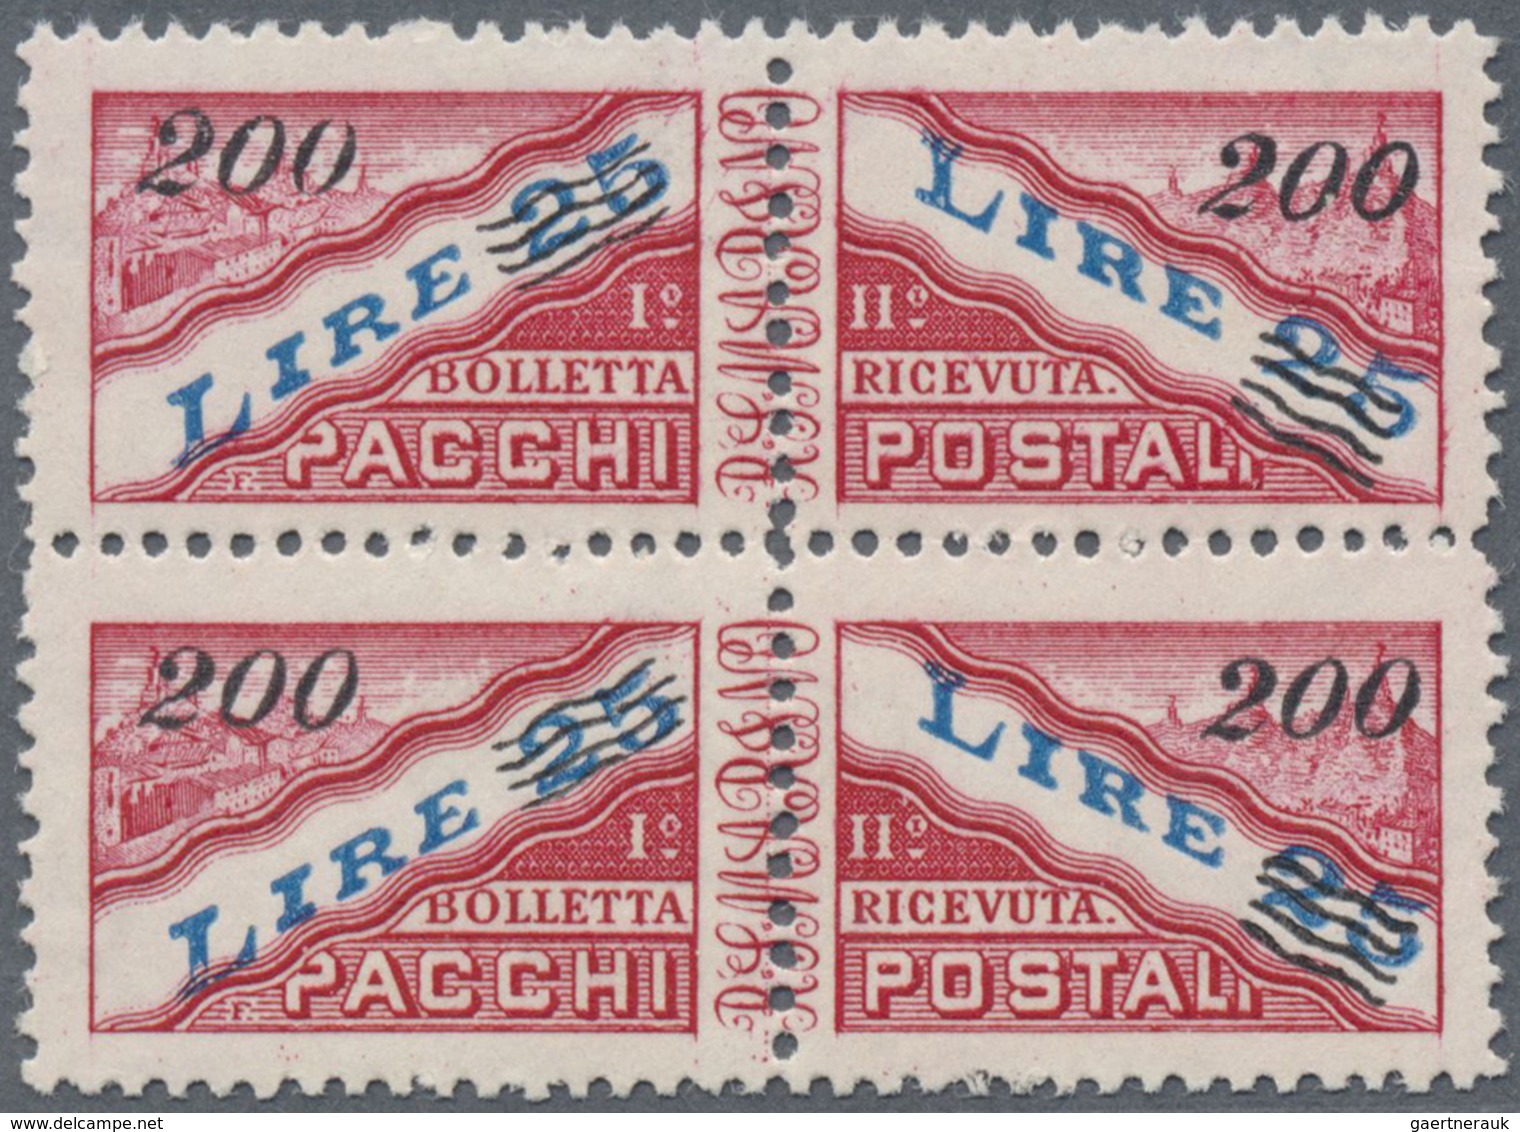 **/ San Marino - Paketmarken: 1950, Package Stamps With New Value Overprint 200 L On 25 L. In The Vertic - Paquetes Postales